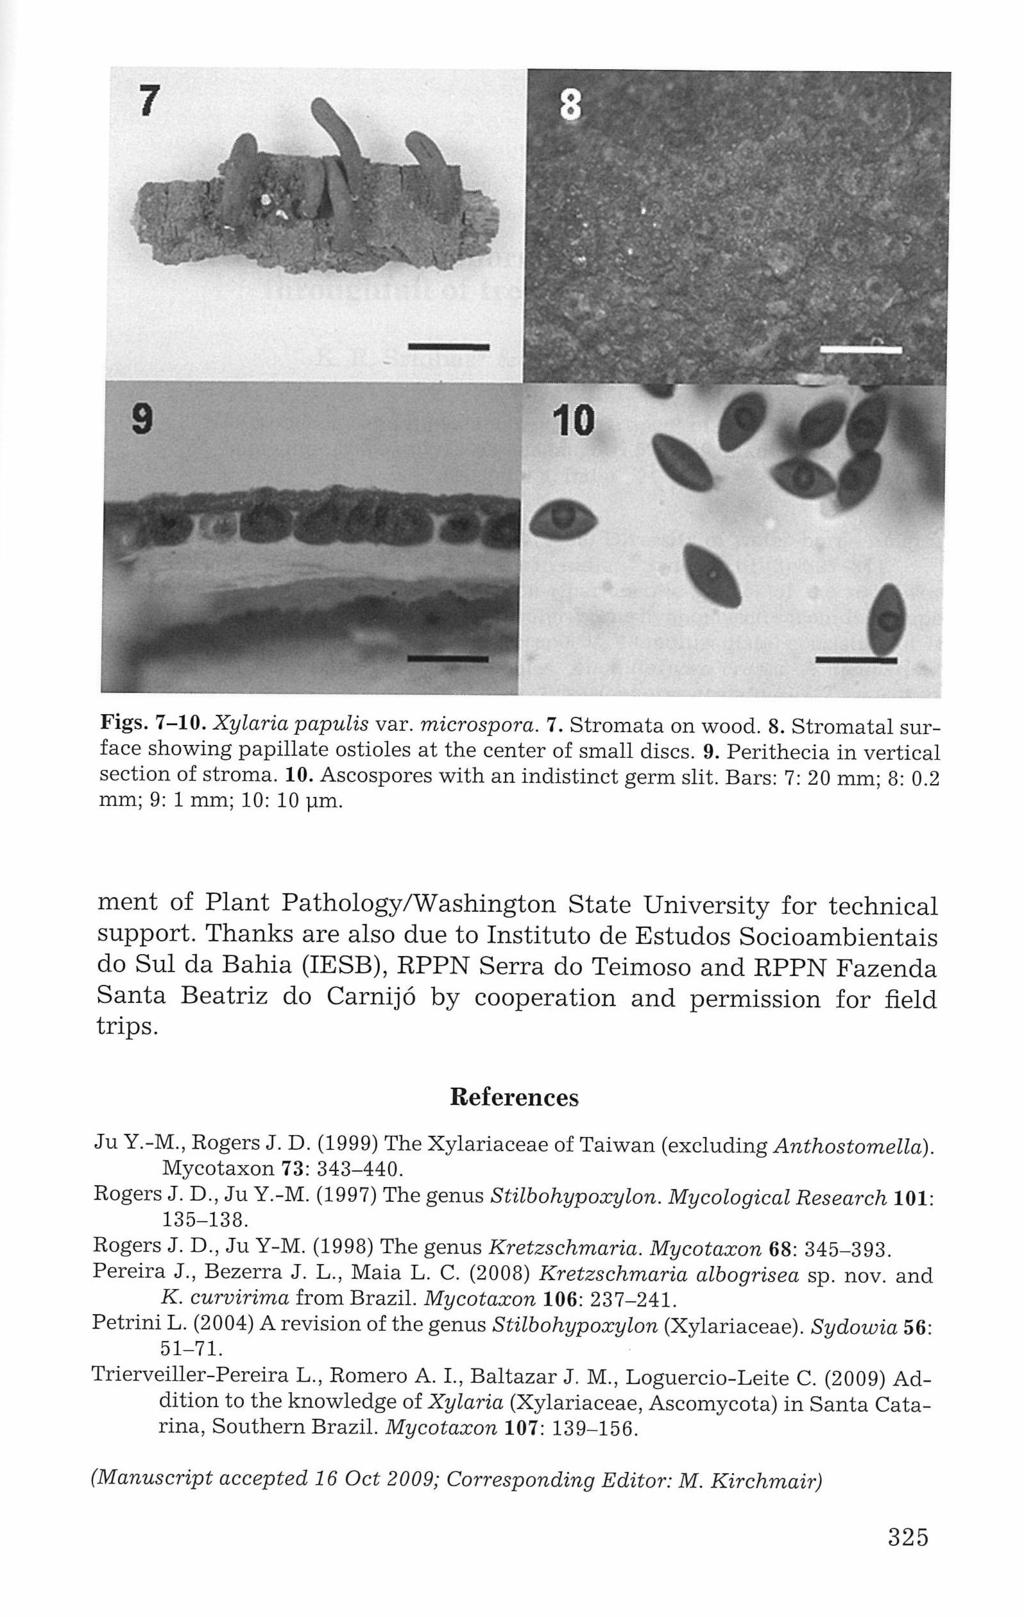 ** 9 1 0 Figs. 7-10. Xylaria papulis var. microspora. 7. Stromata on wood. 8. Stromatal surface showing papillate ostioles at the center of small discs. 9. Perithecia in vertical section of stroma.